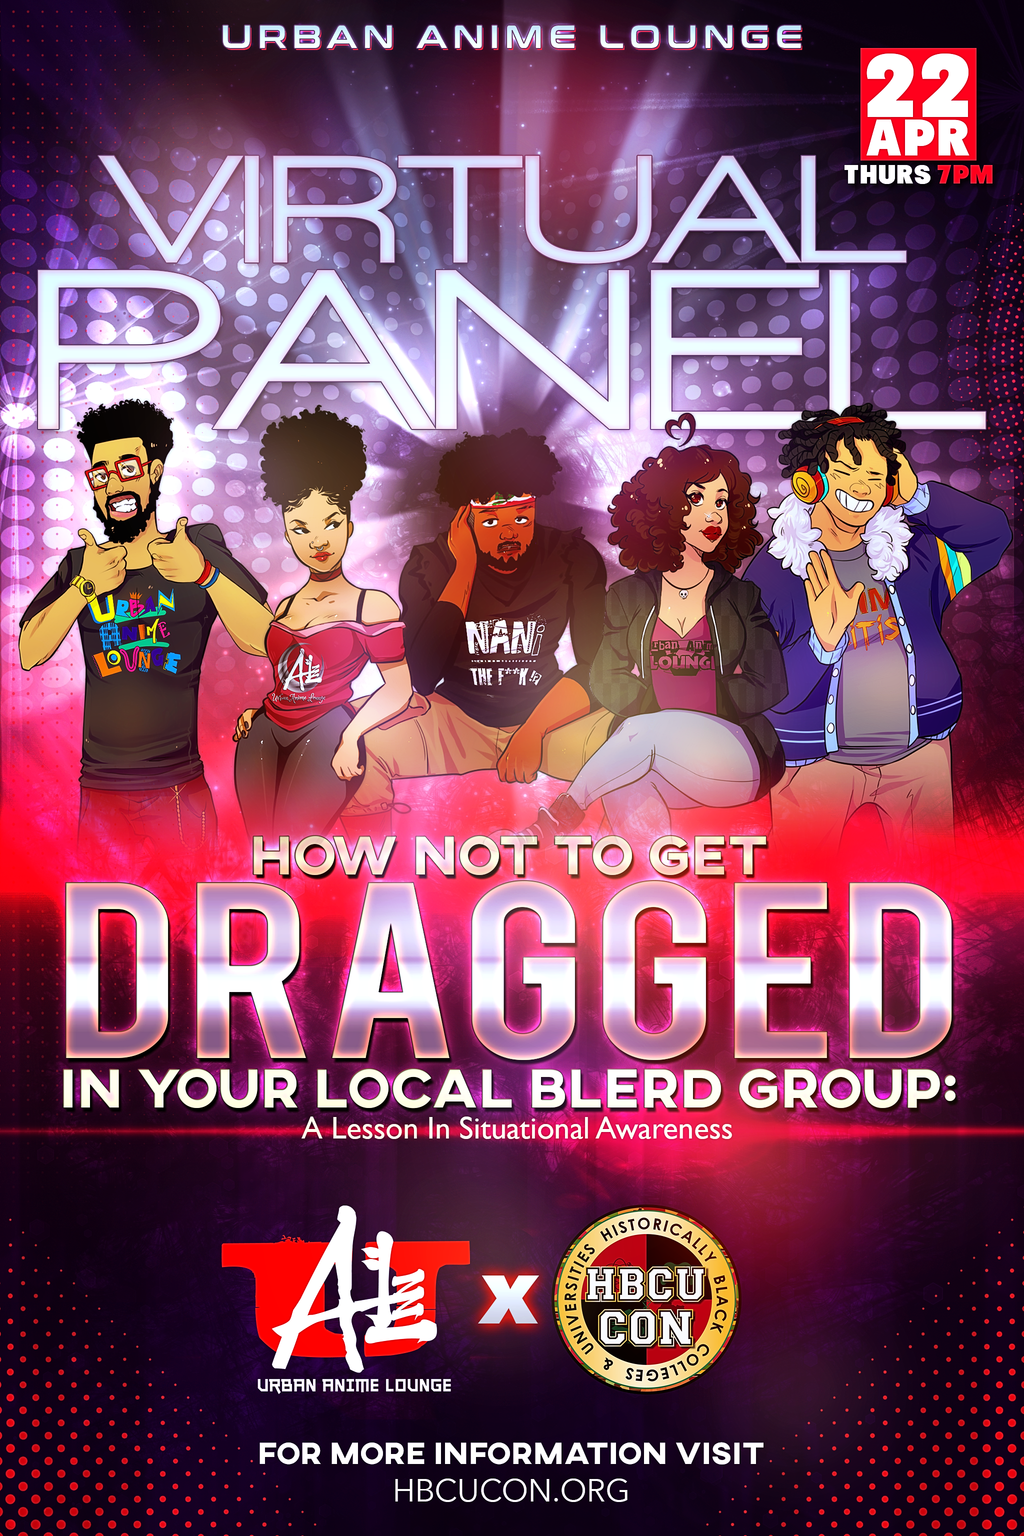 Urban Anime Lounge Presents: "How Not to Get Dragged in Your Local Blerd Group"